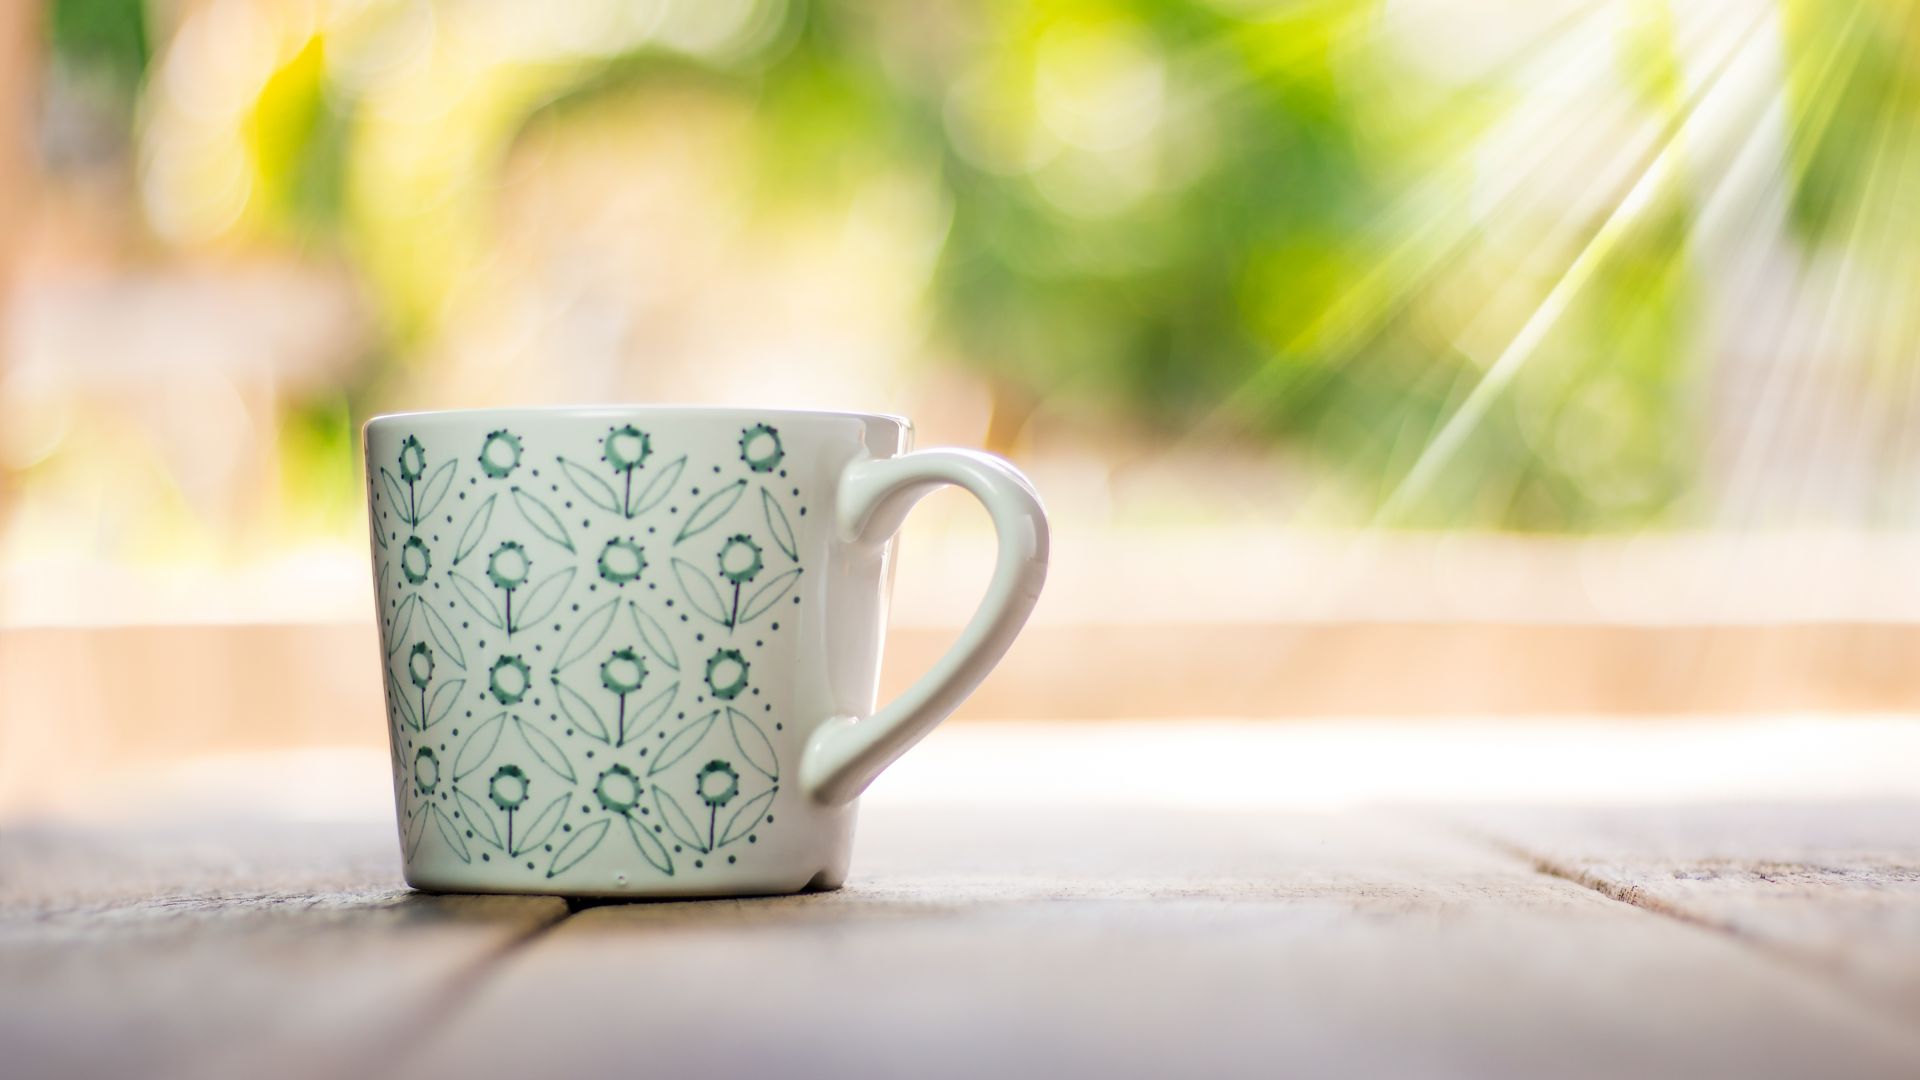 Wallpaper Cup, sunlight, coffee cup, morning